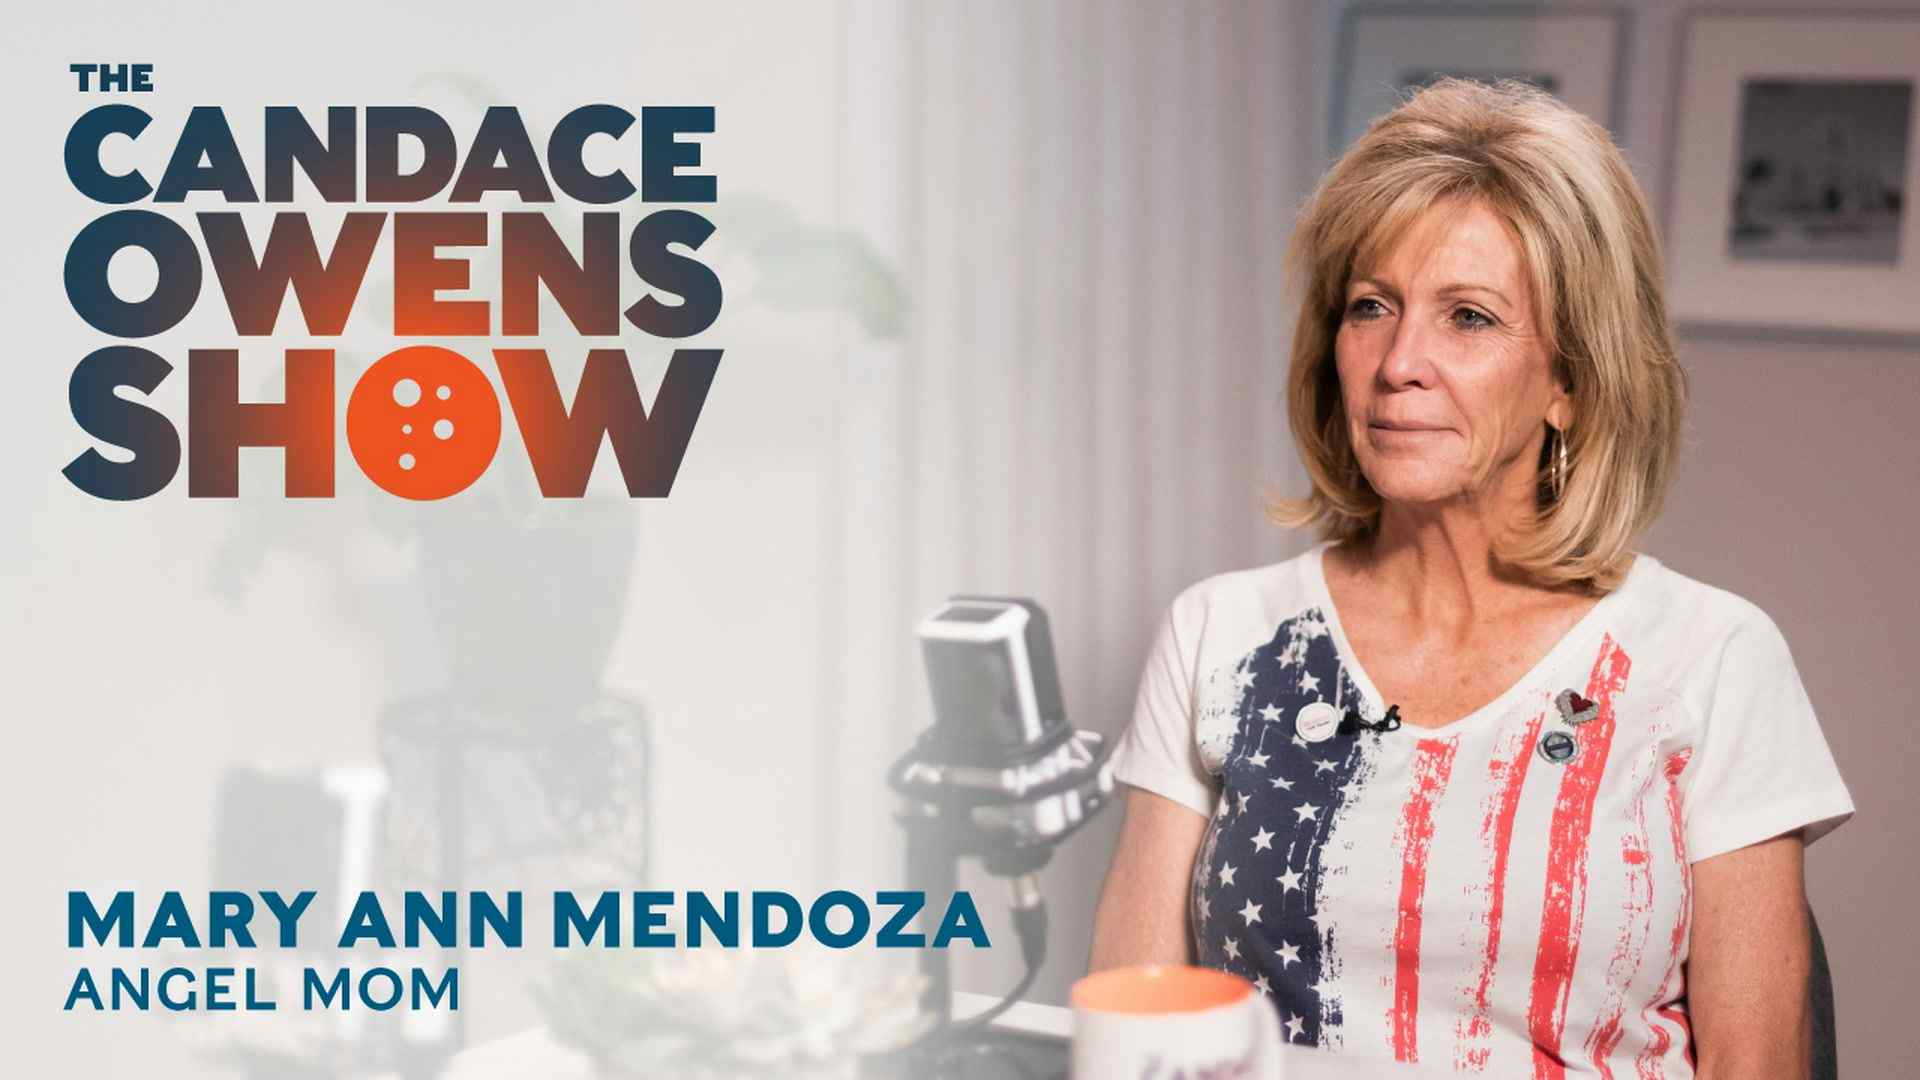 The Candace Owens Show: Mary Ann Mendoza